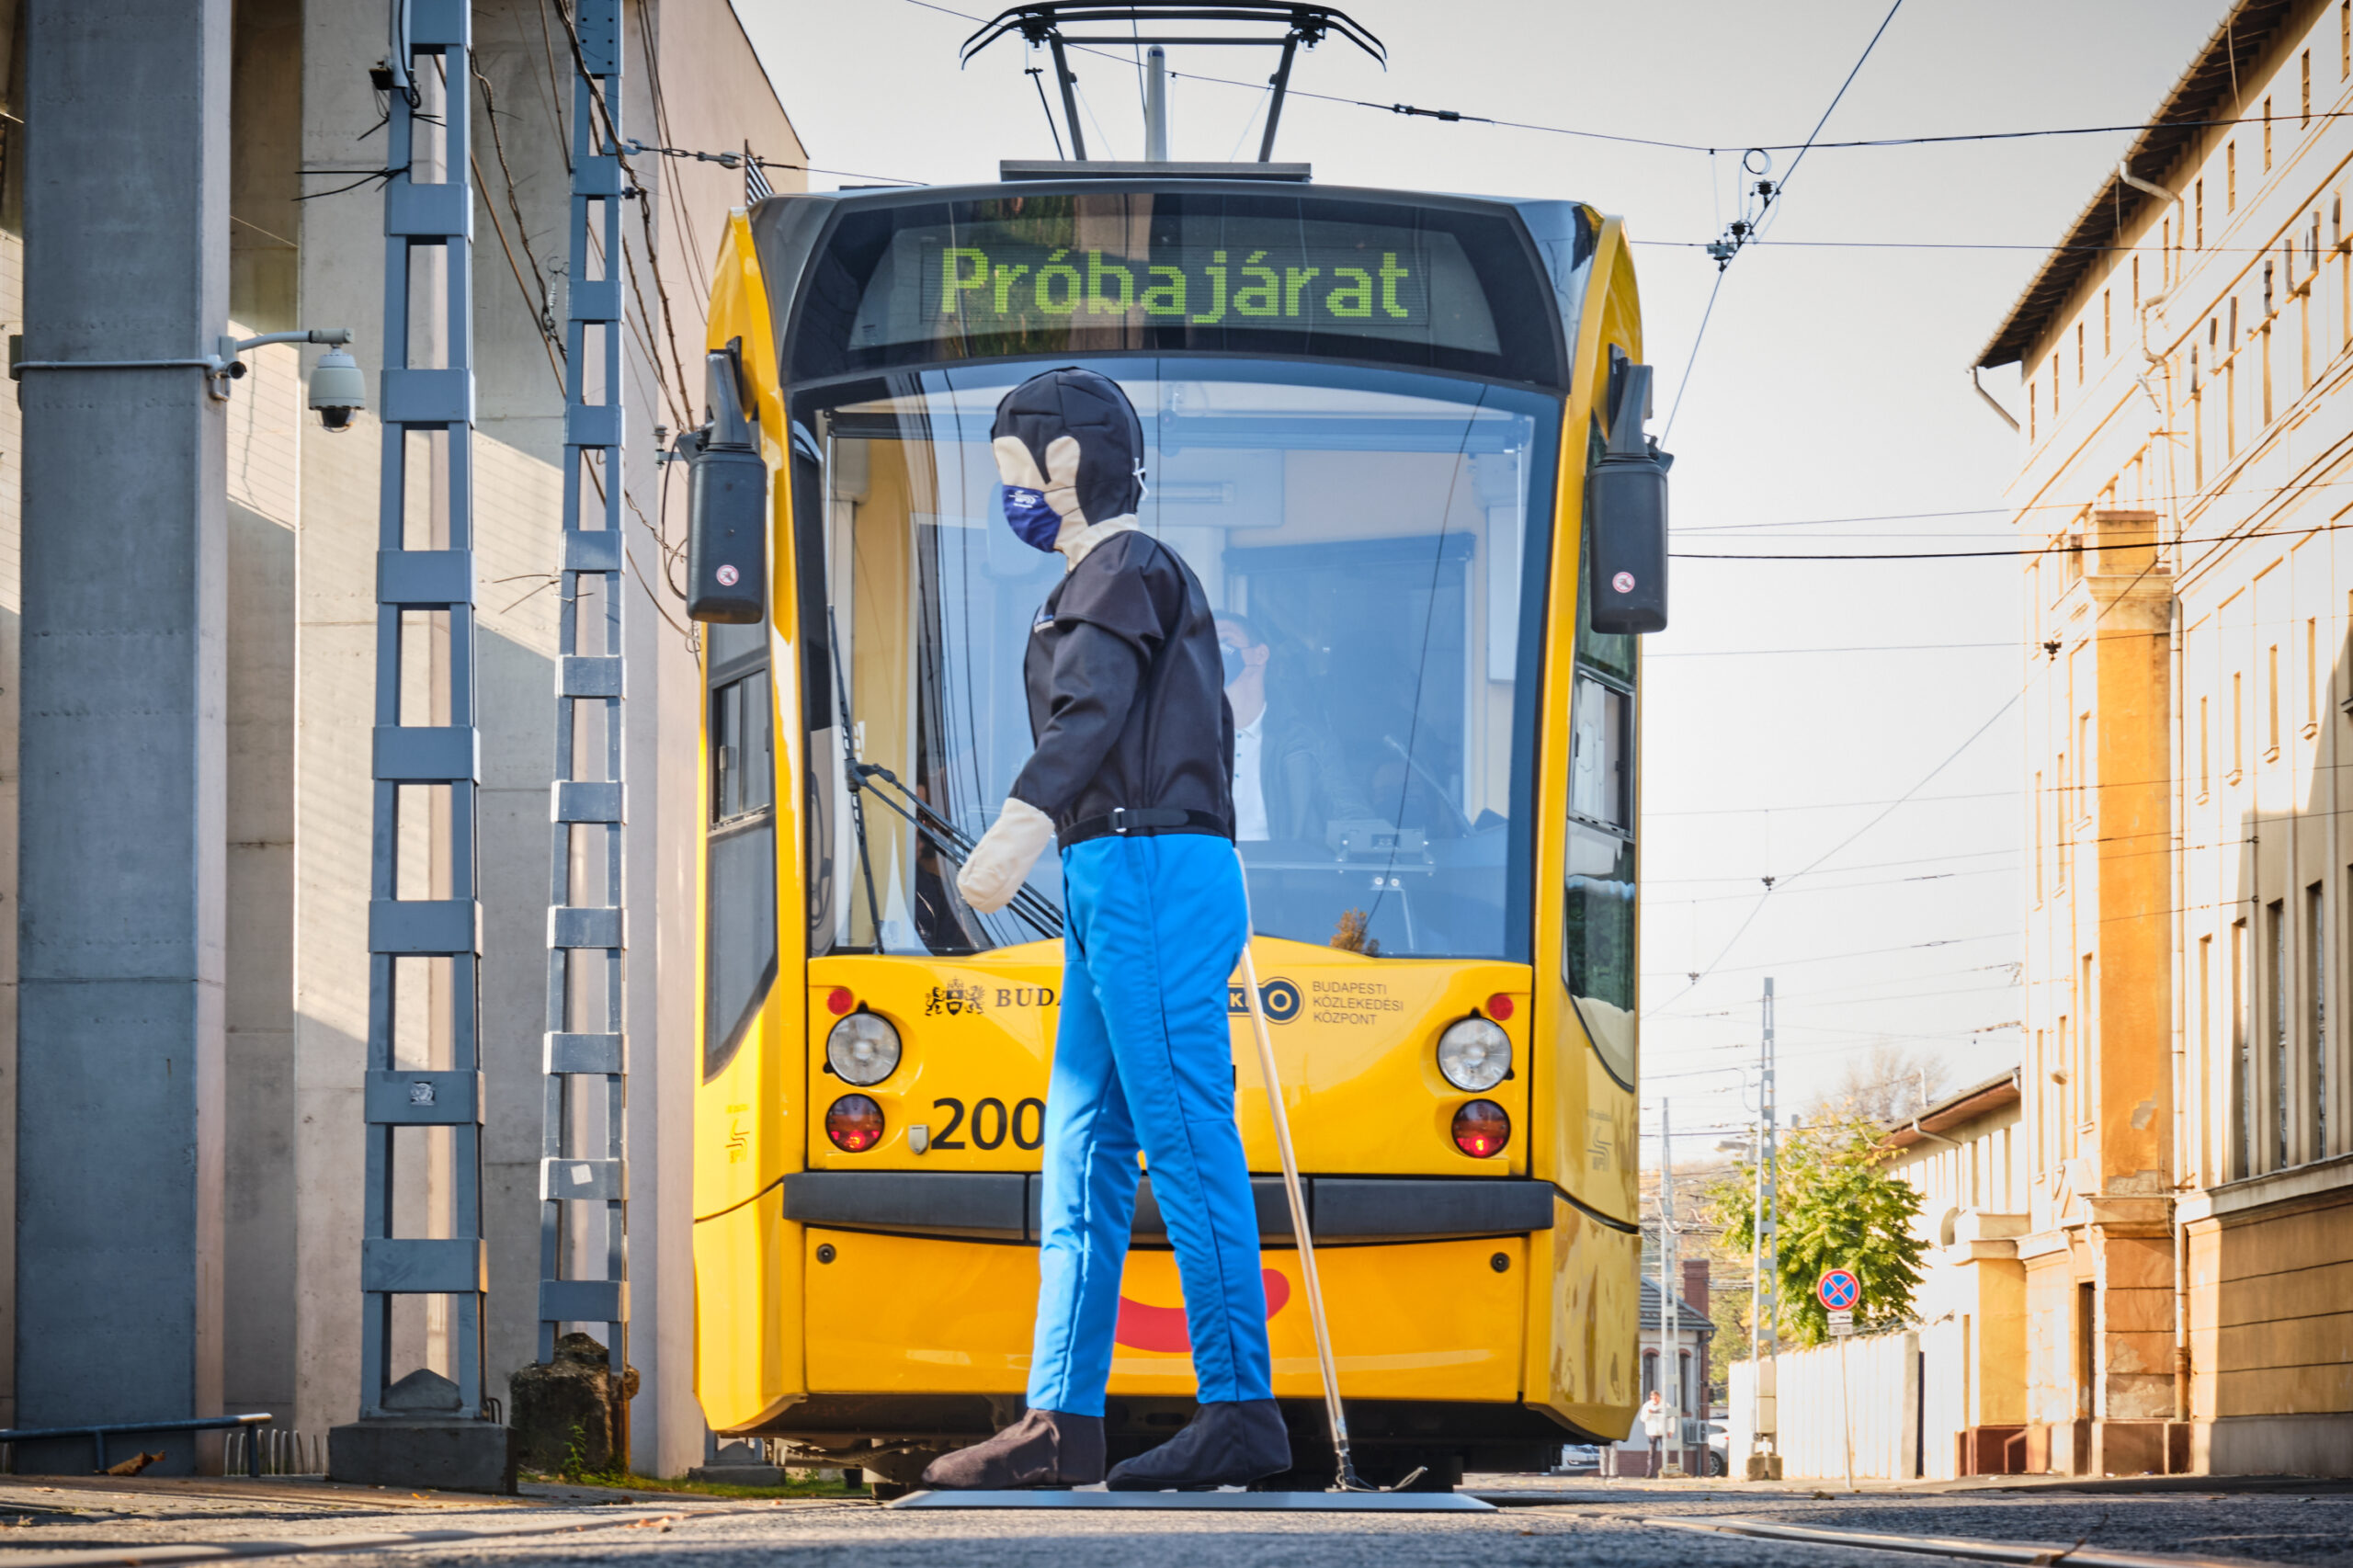 Trials of Combino tram equipped with Siemens Mobility’s technical vision system